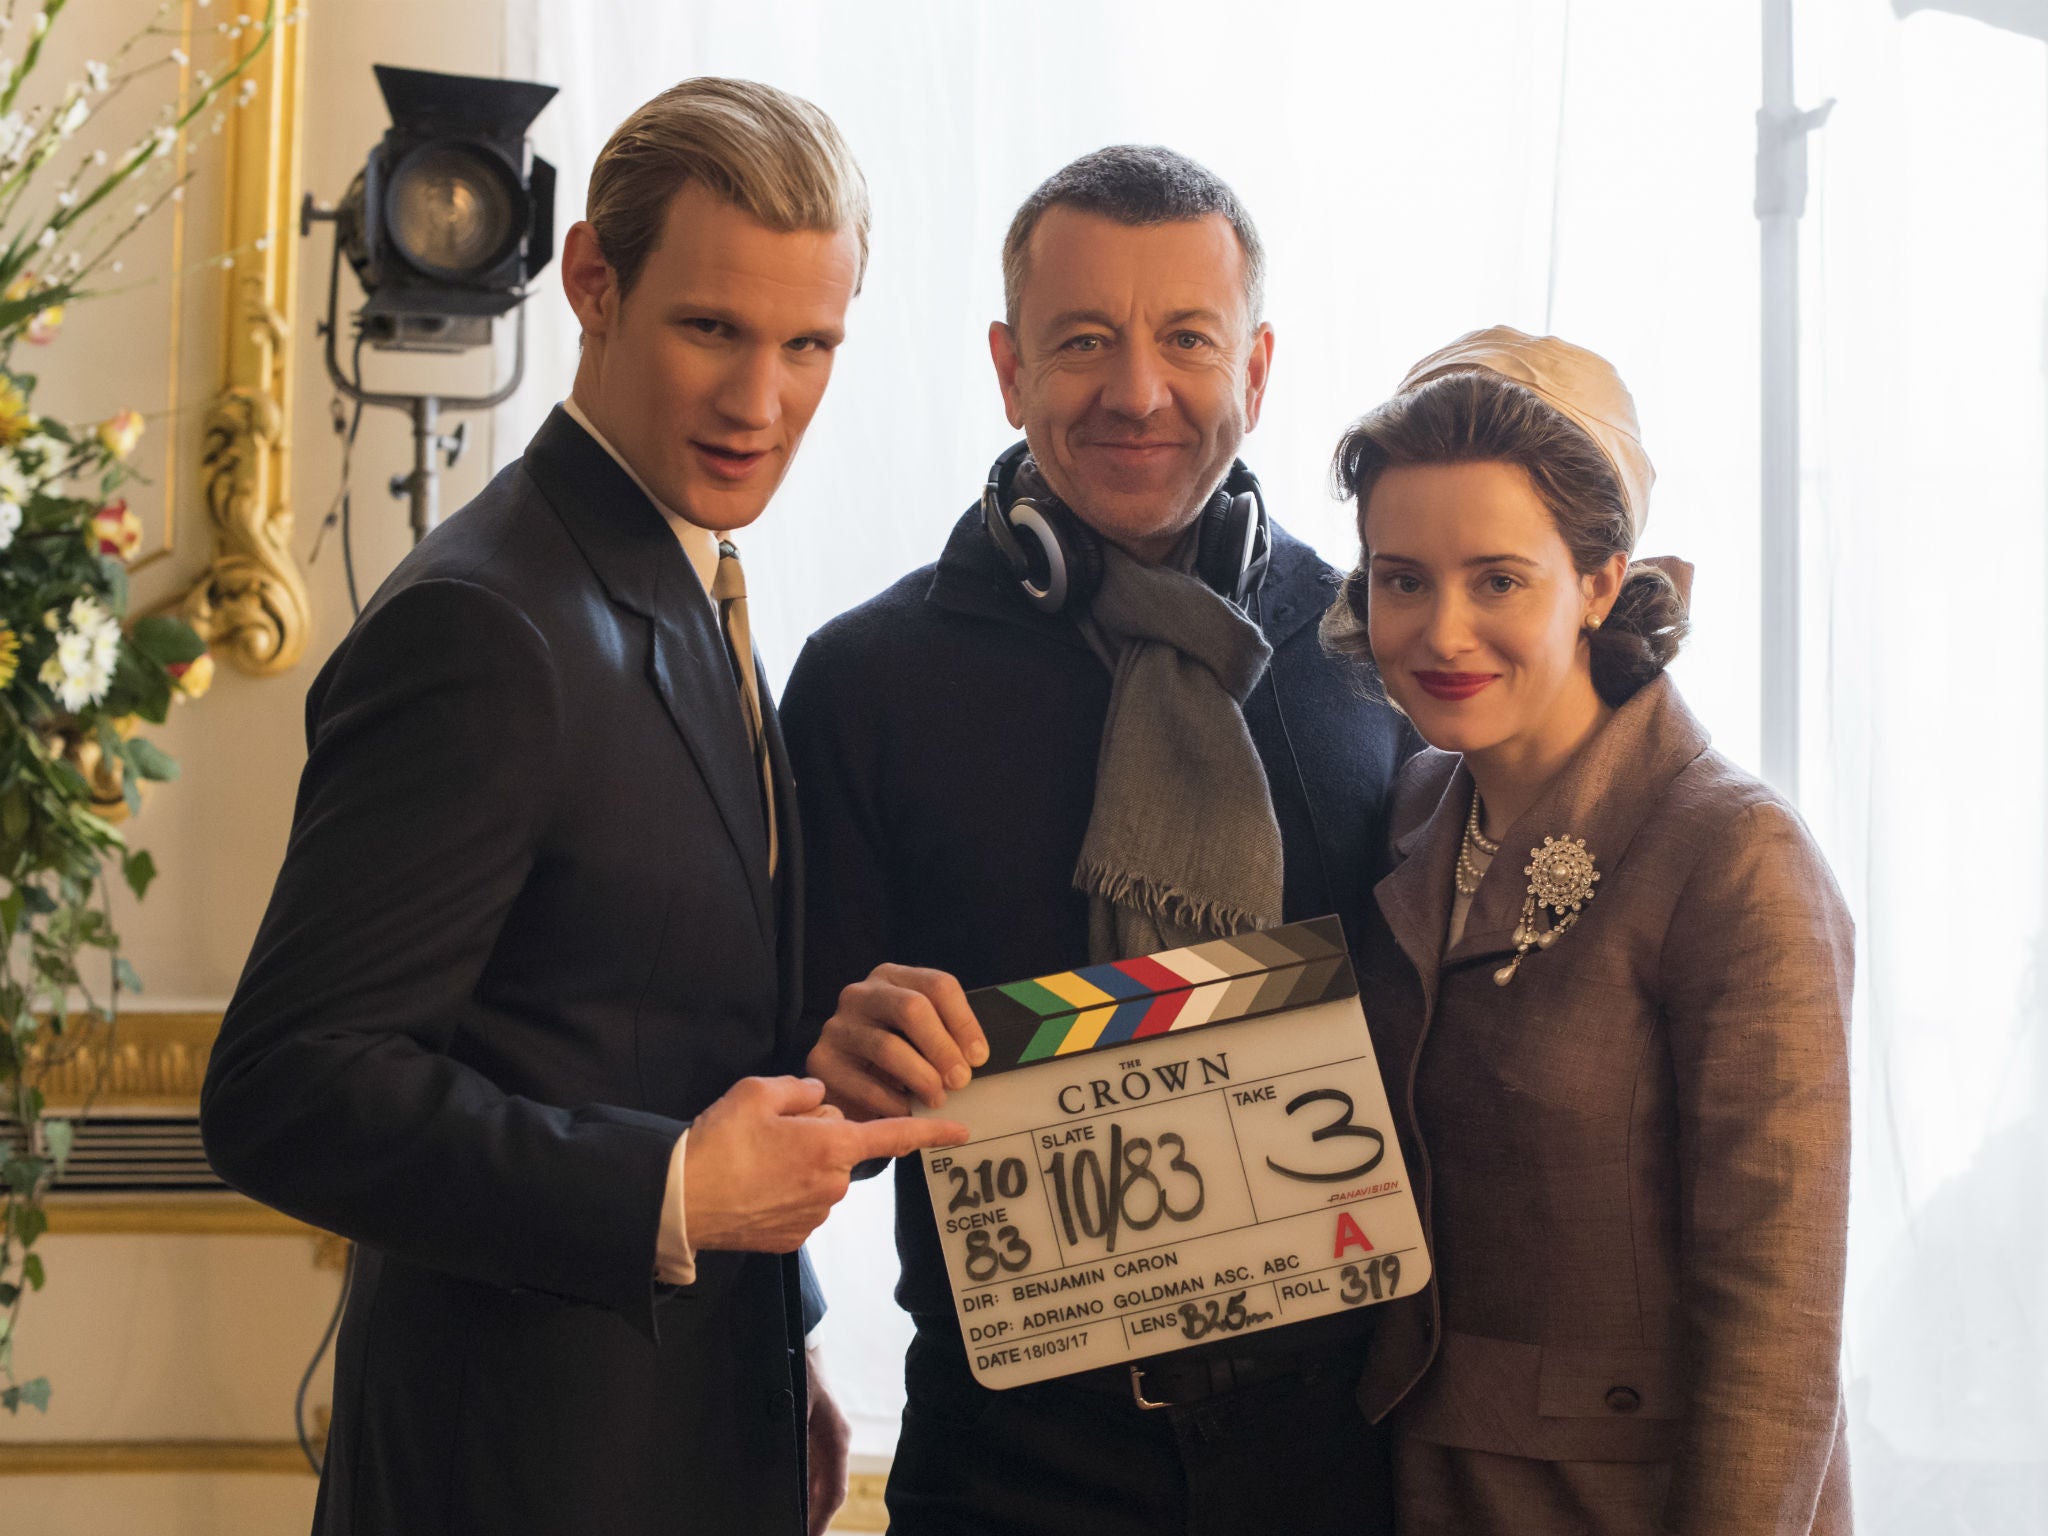 Matt Smith (left) as Prince Philip with ‘The Crown’ writer and creator Peter Morgan and Claire Foy, who plays Elizabeth